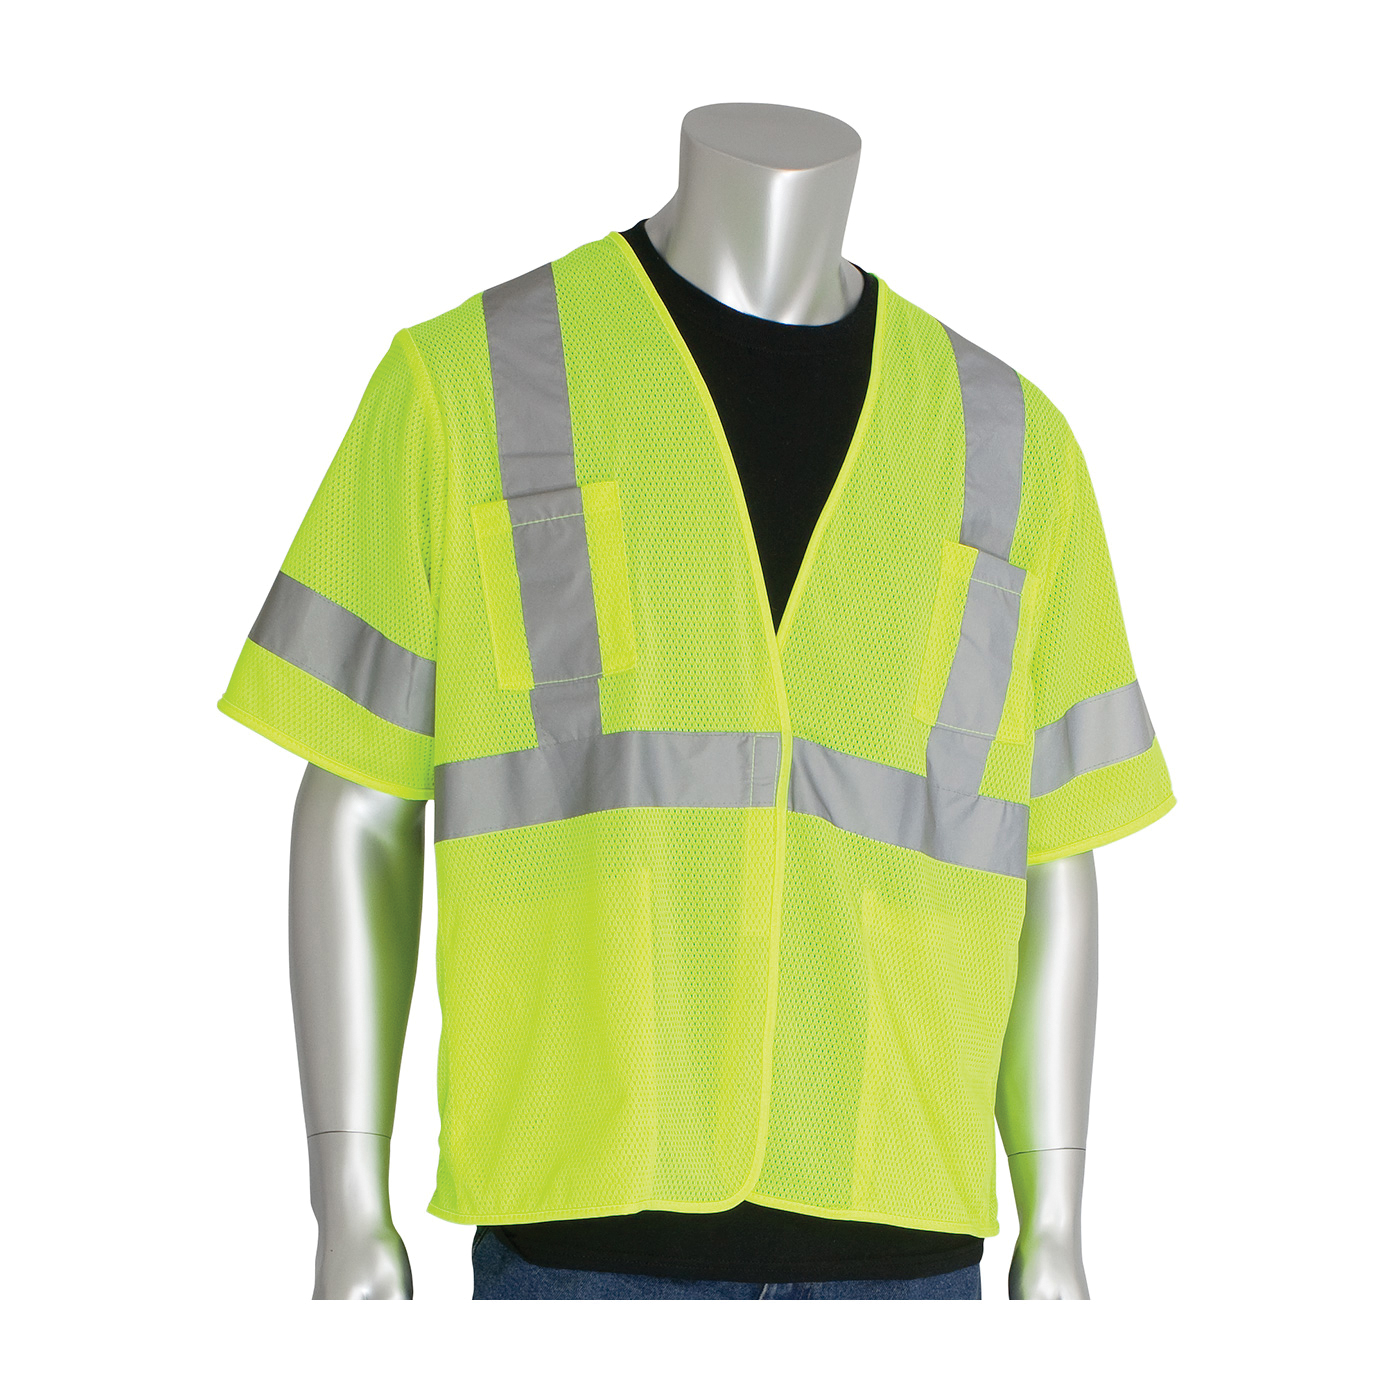 PIP® 303-HSVELY-L Safety Vest, L, Hi-Viz Lime Yellow, Polyester Mesh, Hook and Loop Closure, 4 Pockets, ANSI Class: Class 3, Specifications Met: ANSI 107 Type R